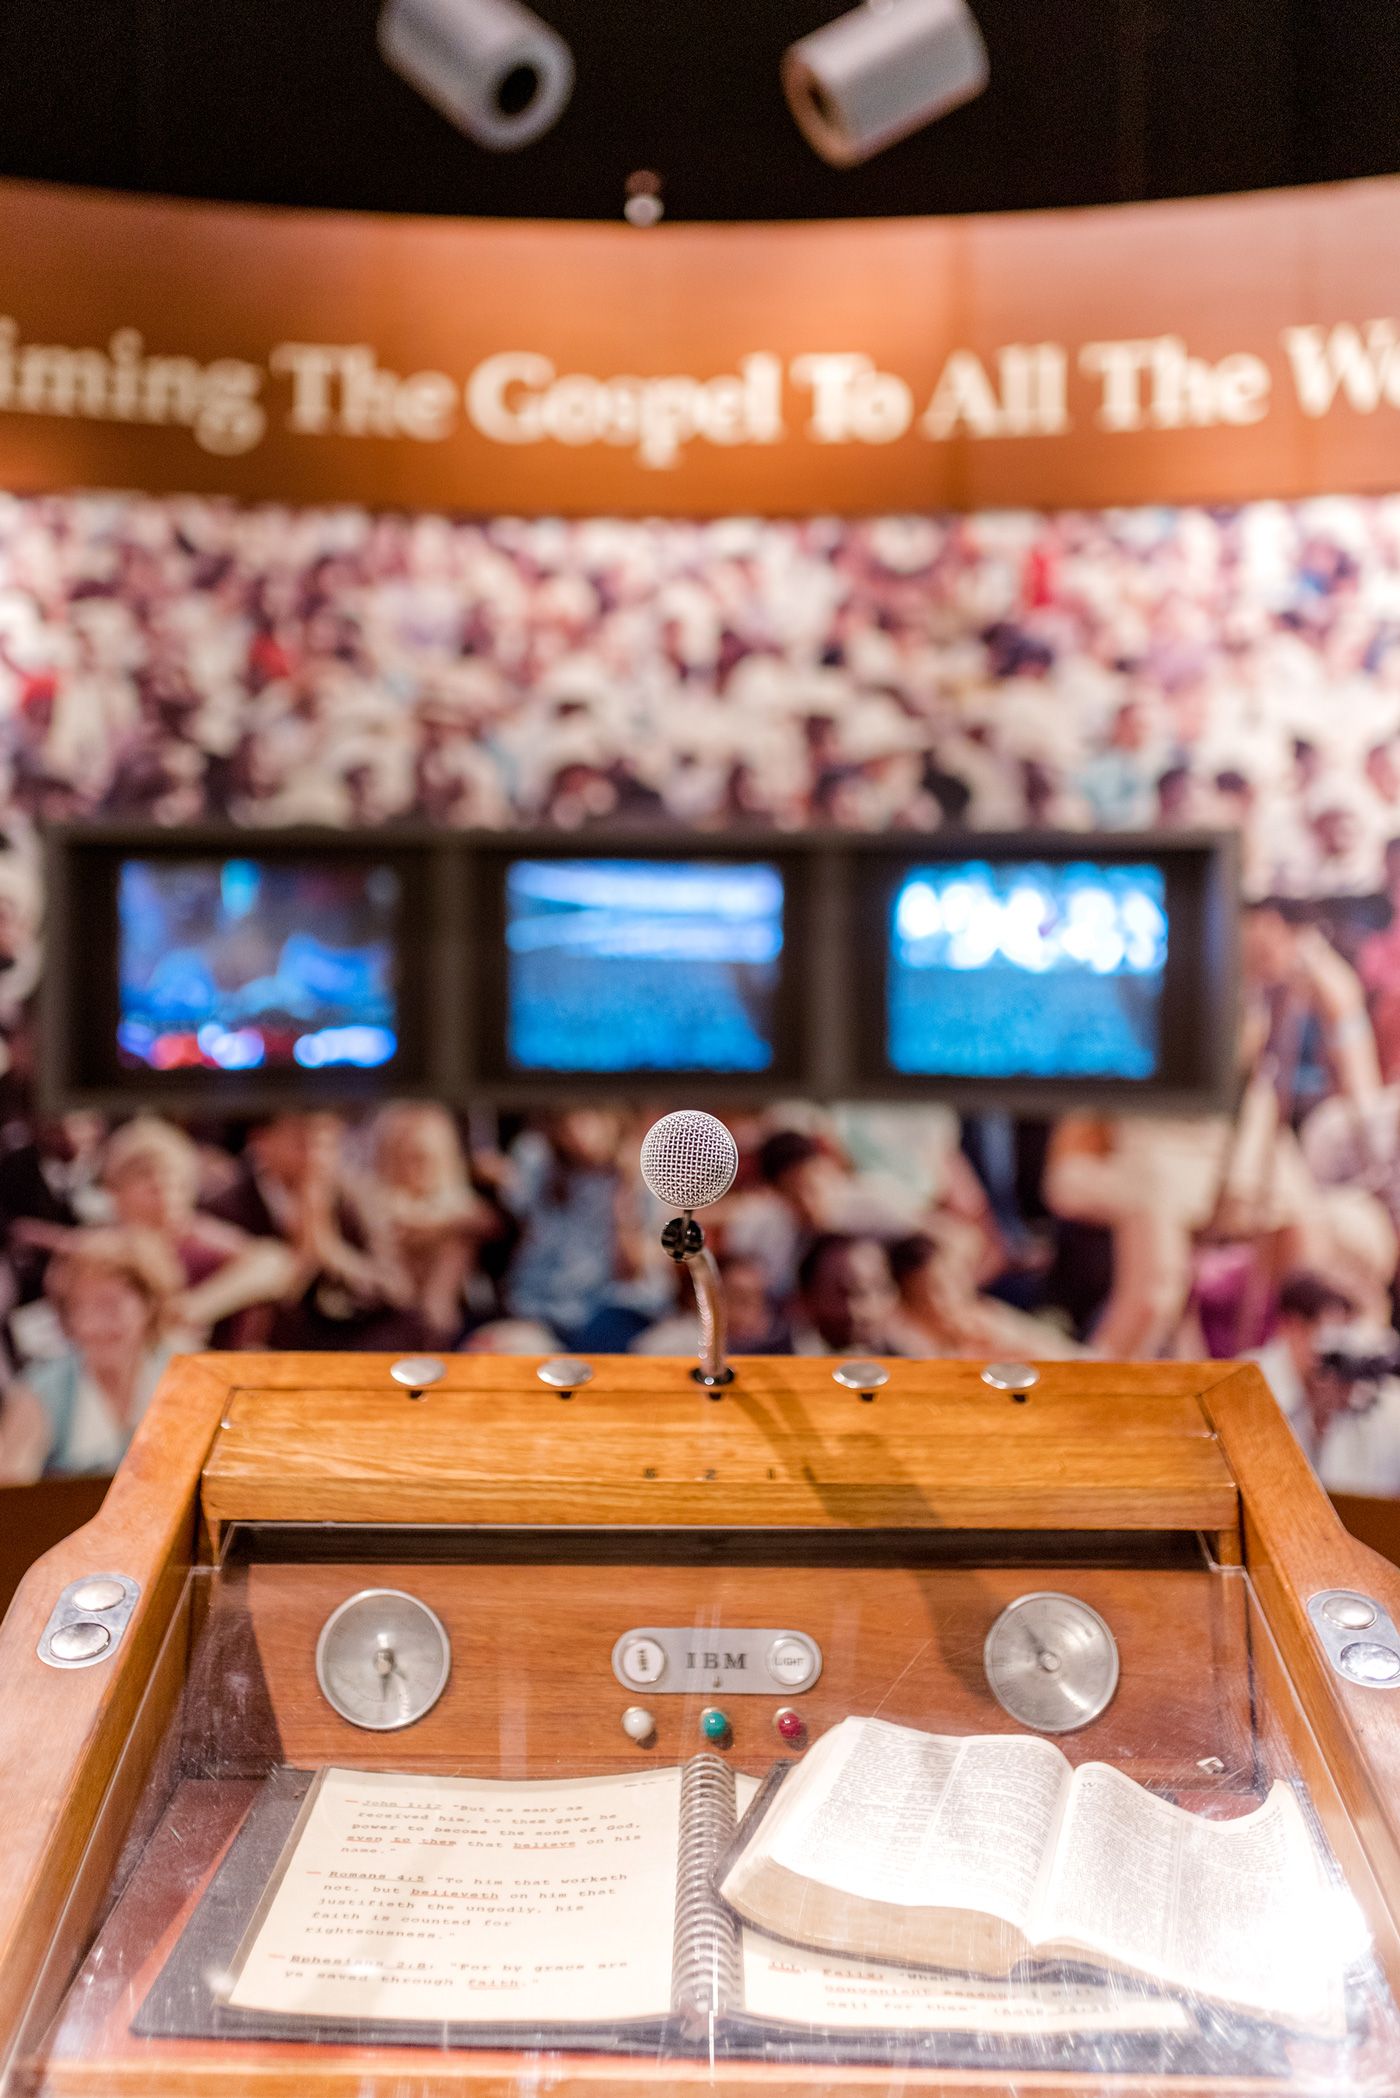 Billy Graham's Podium in the Life and Ministry of Billy Graham Display